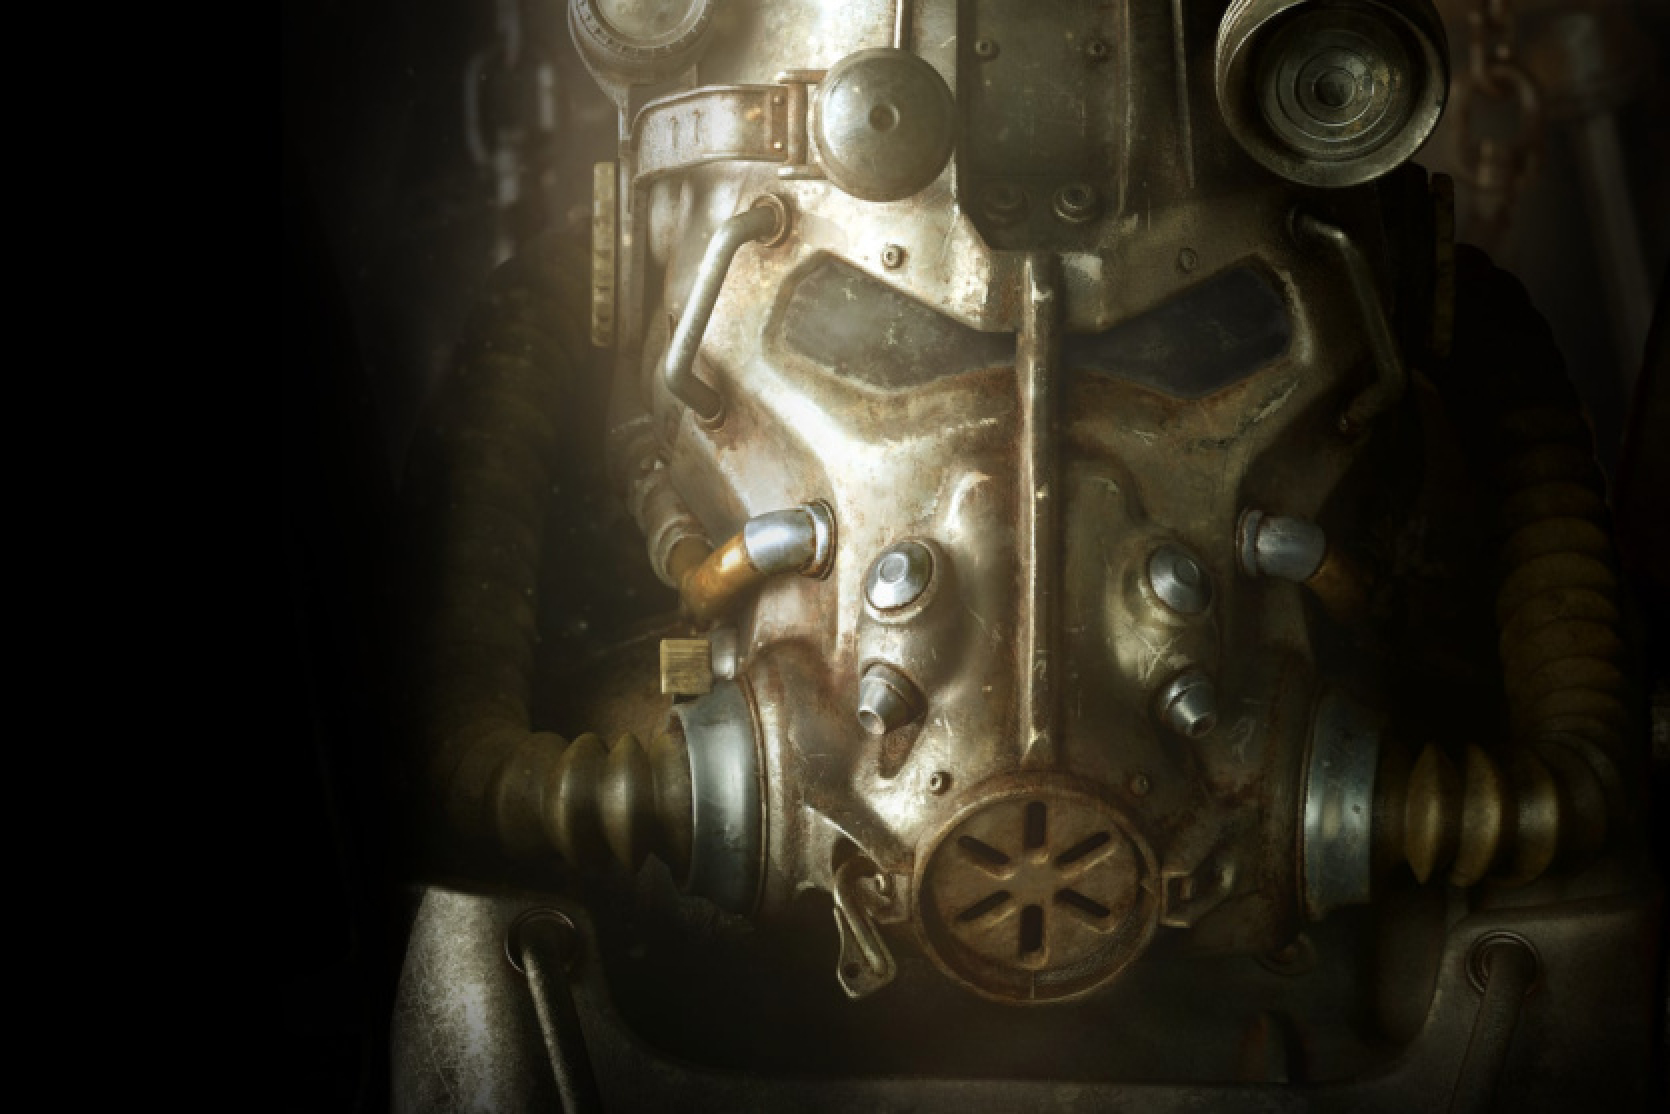 Fallout 4 has received the Next-Gen update on current PlayStation, Xbox and PC versions - but not for PS Plus subscriptions